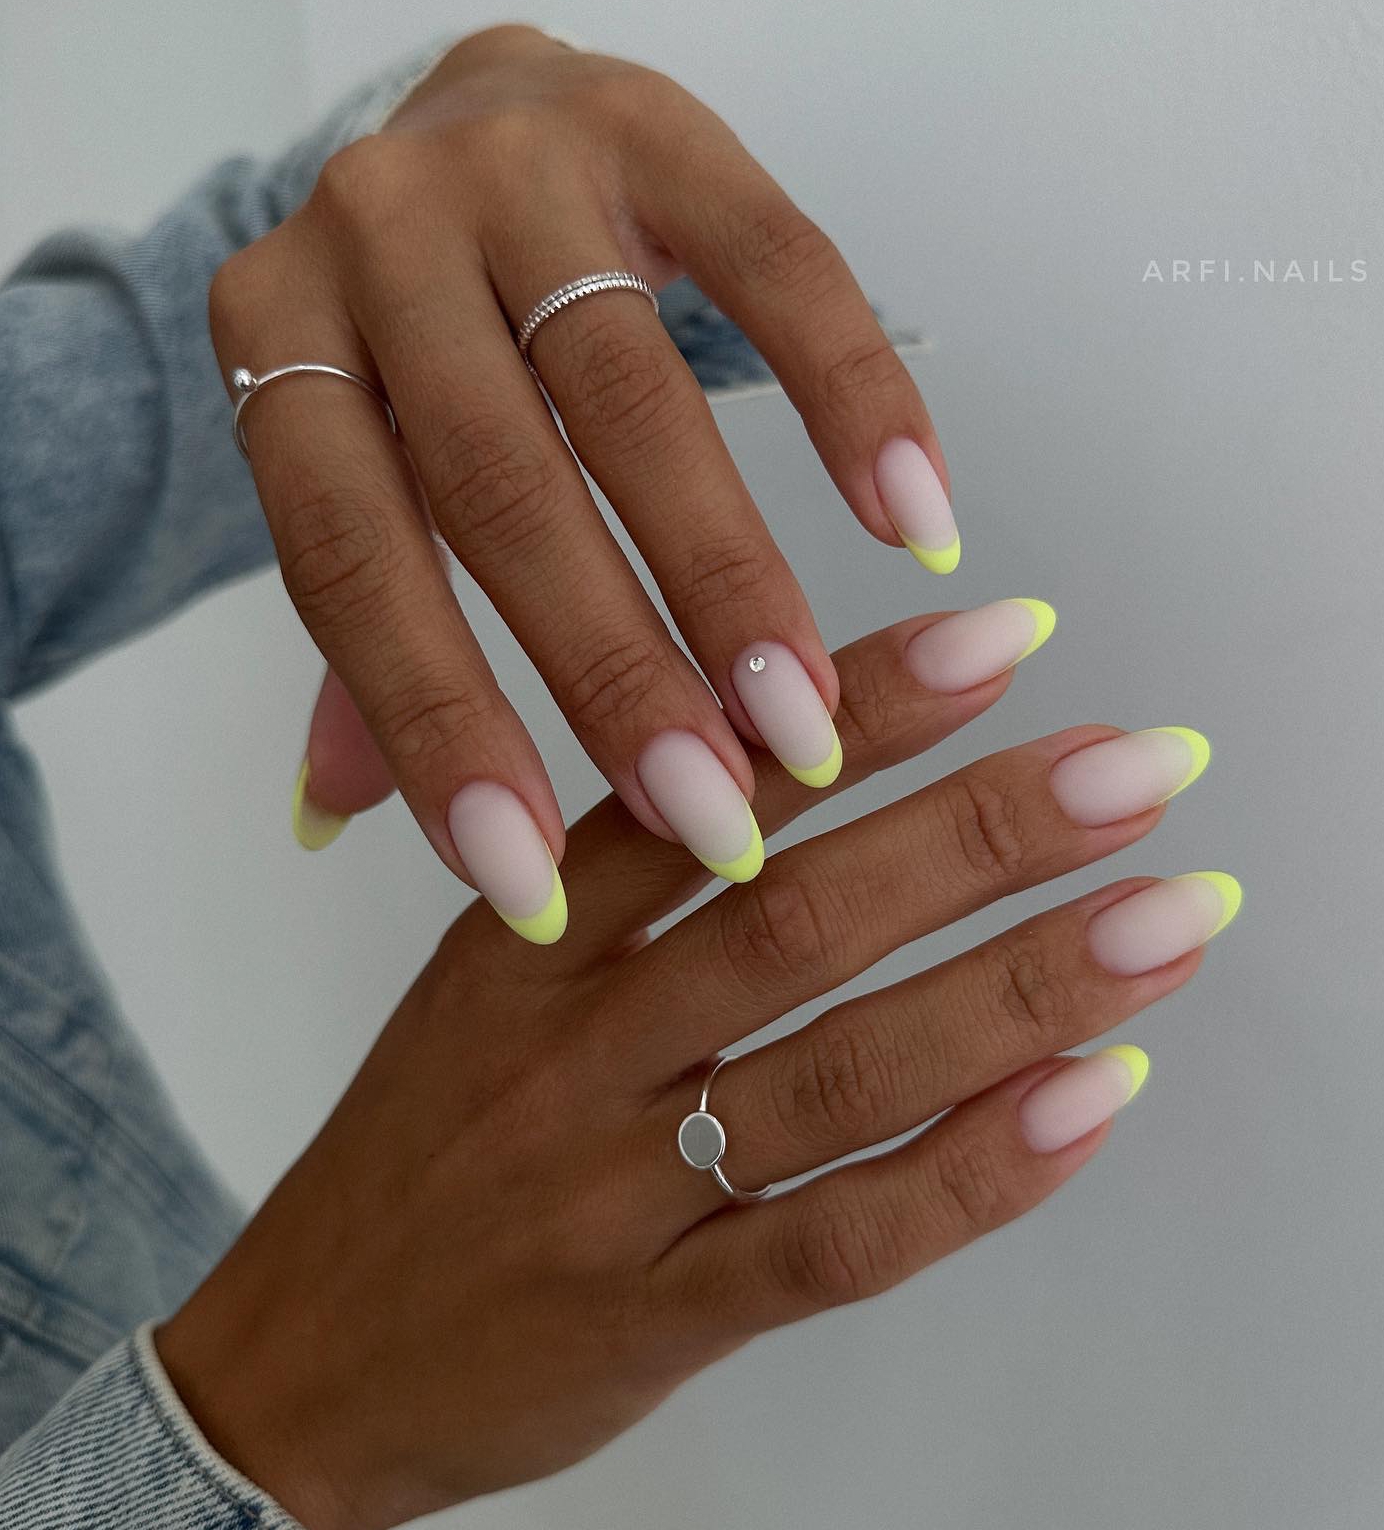 Round French Nails with Yellow Tips